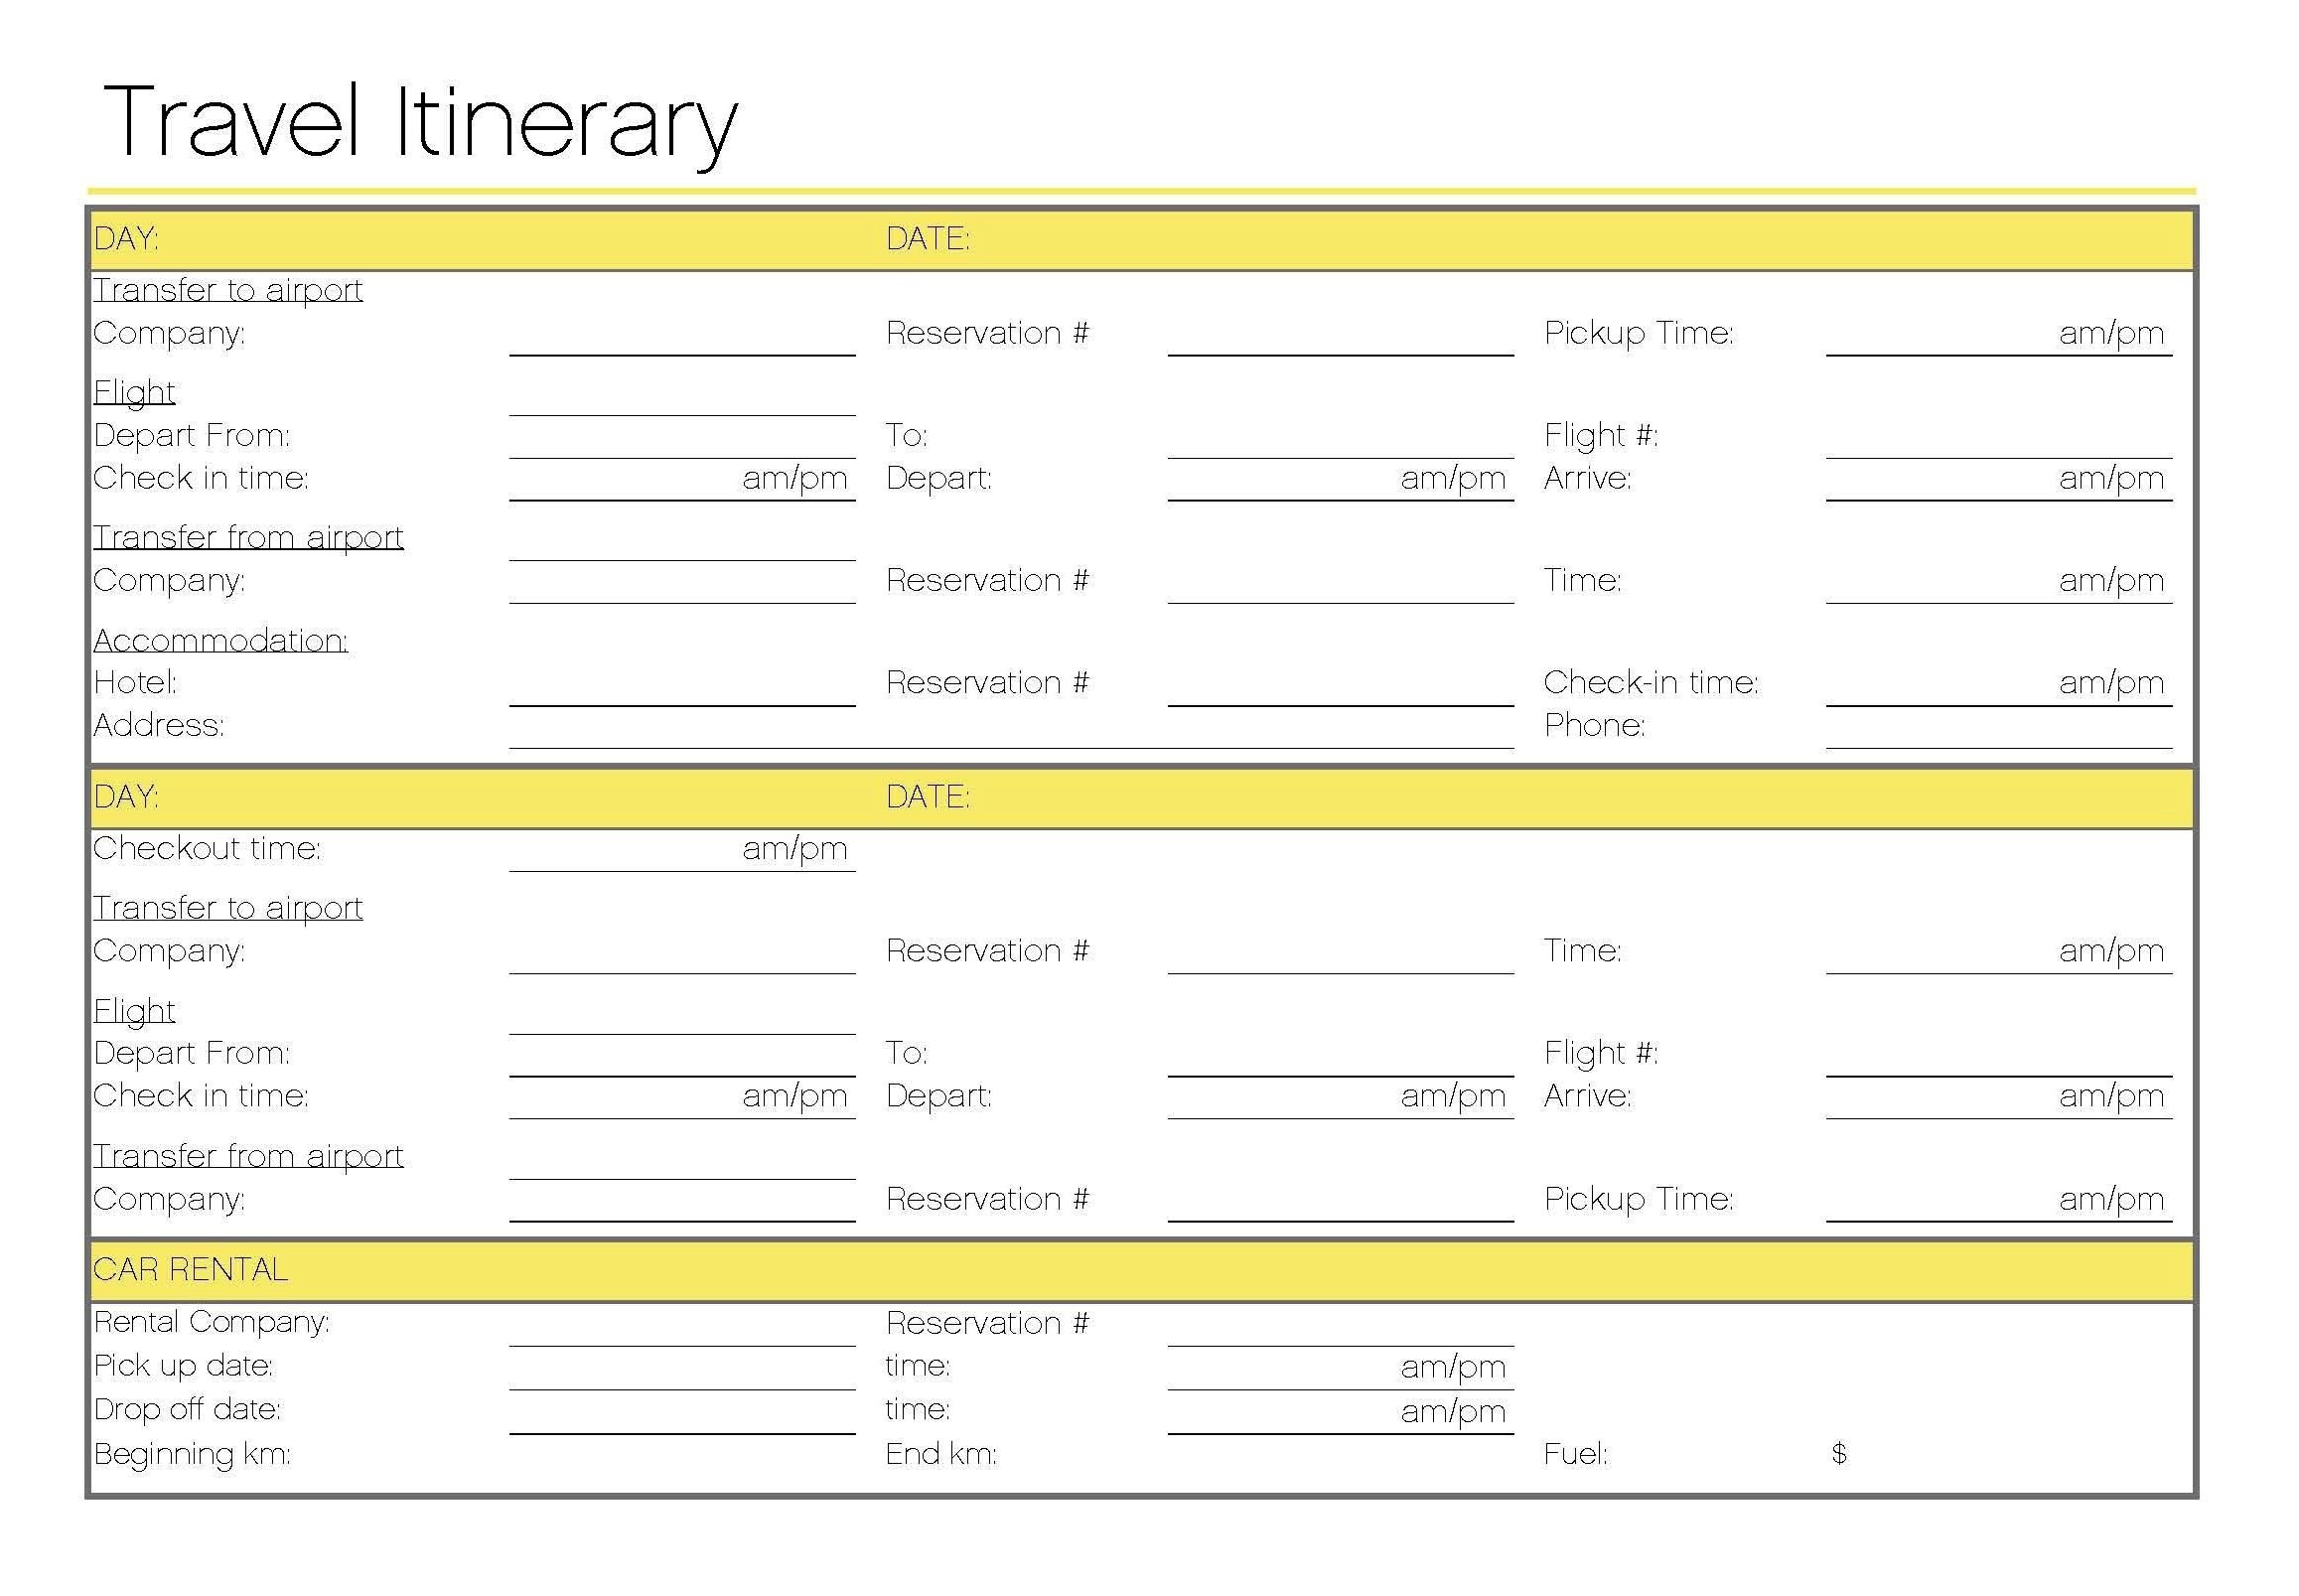 travel-itinerary-template-my-excel-templates